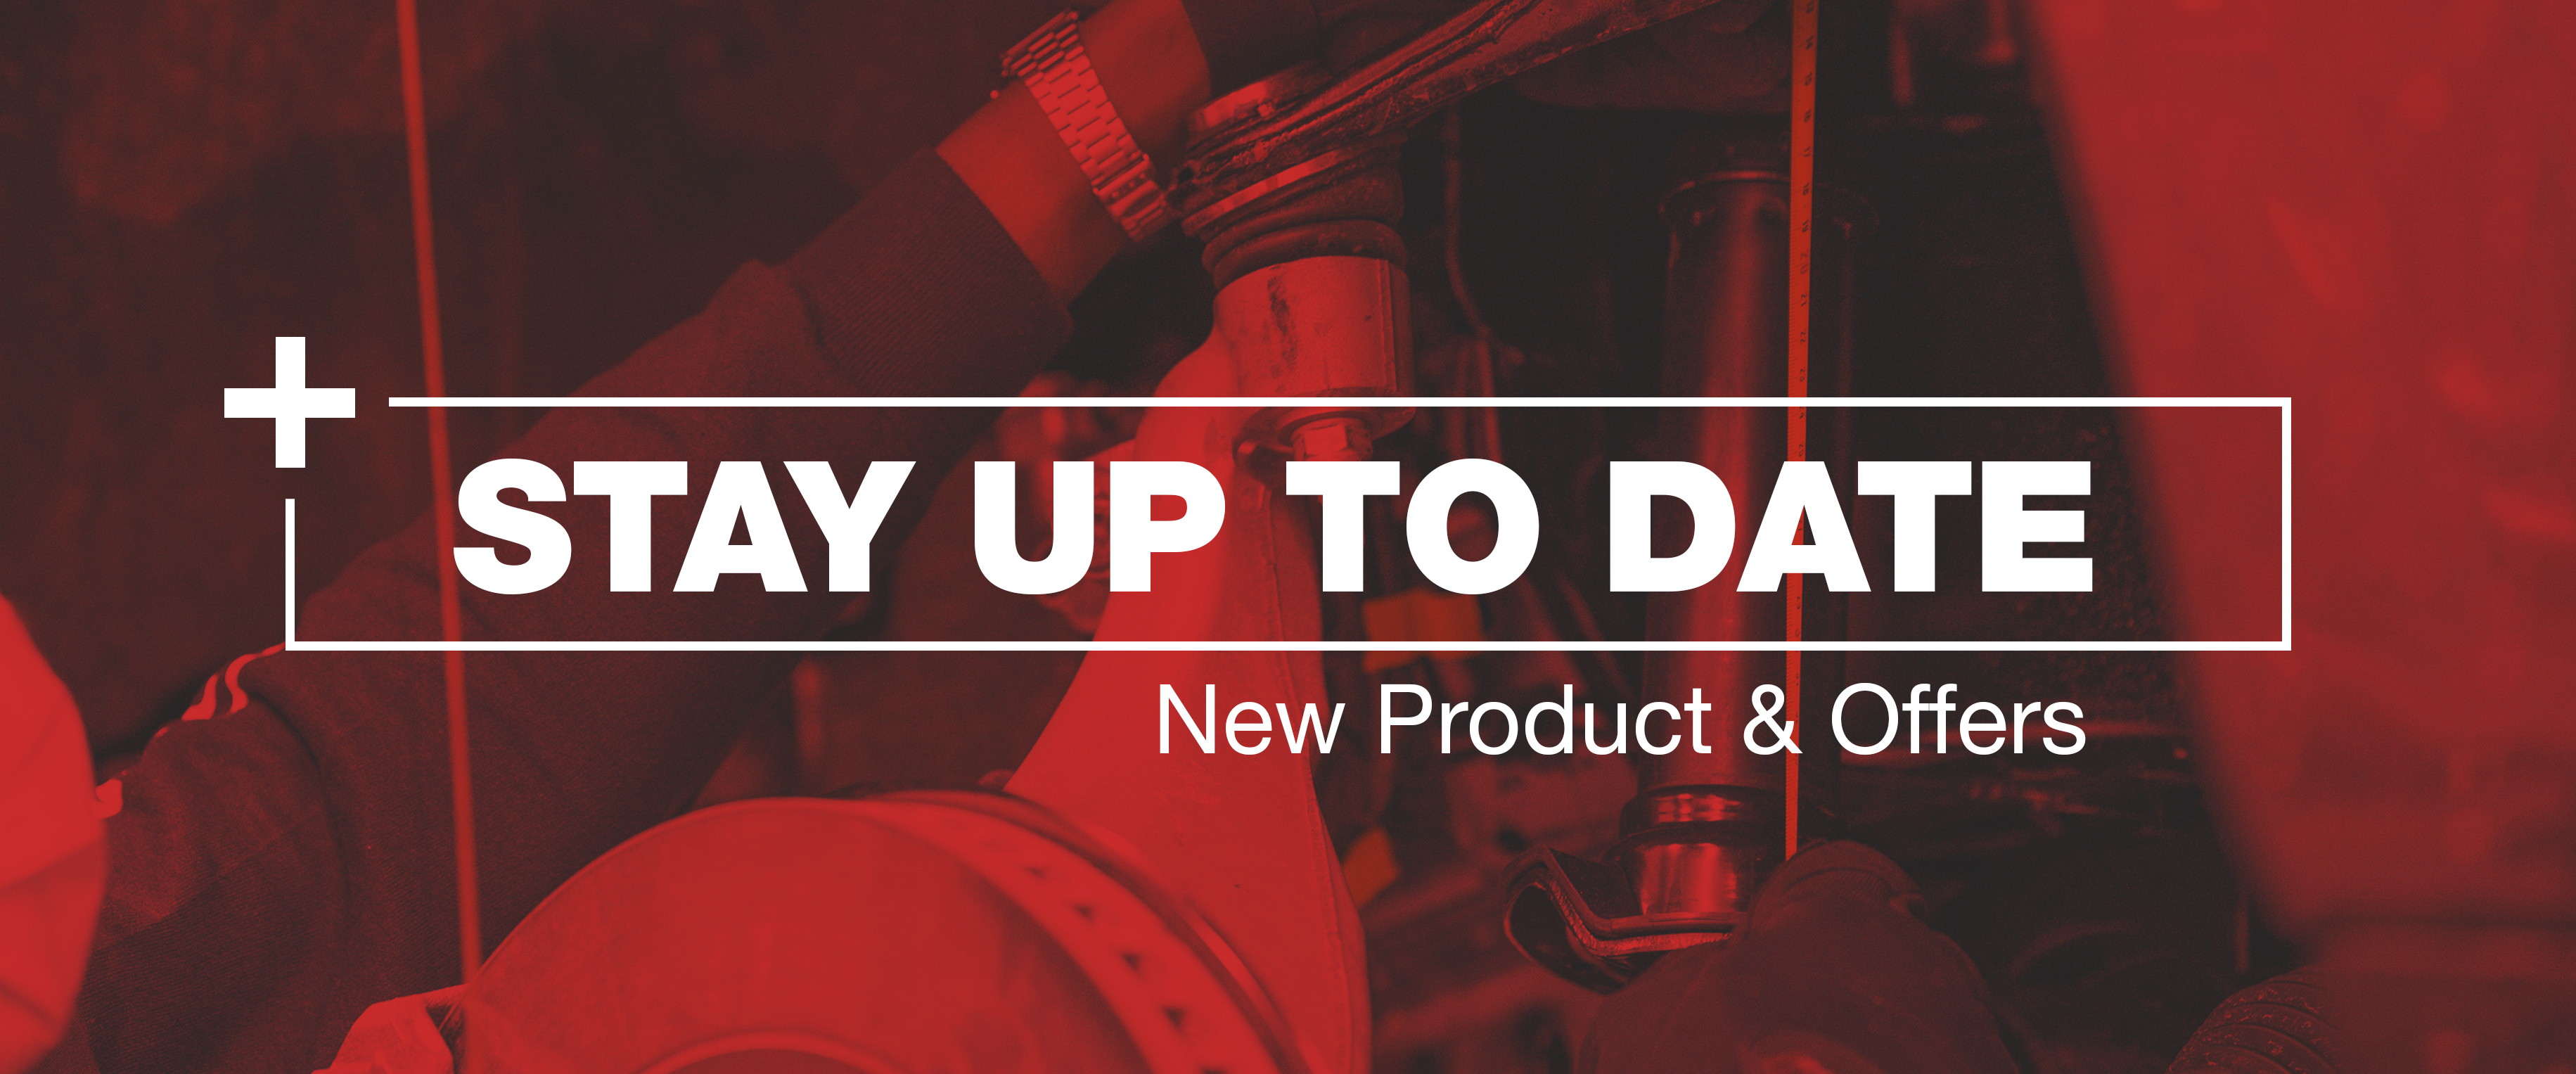 Stay up to date with new products and offers